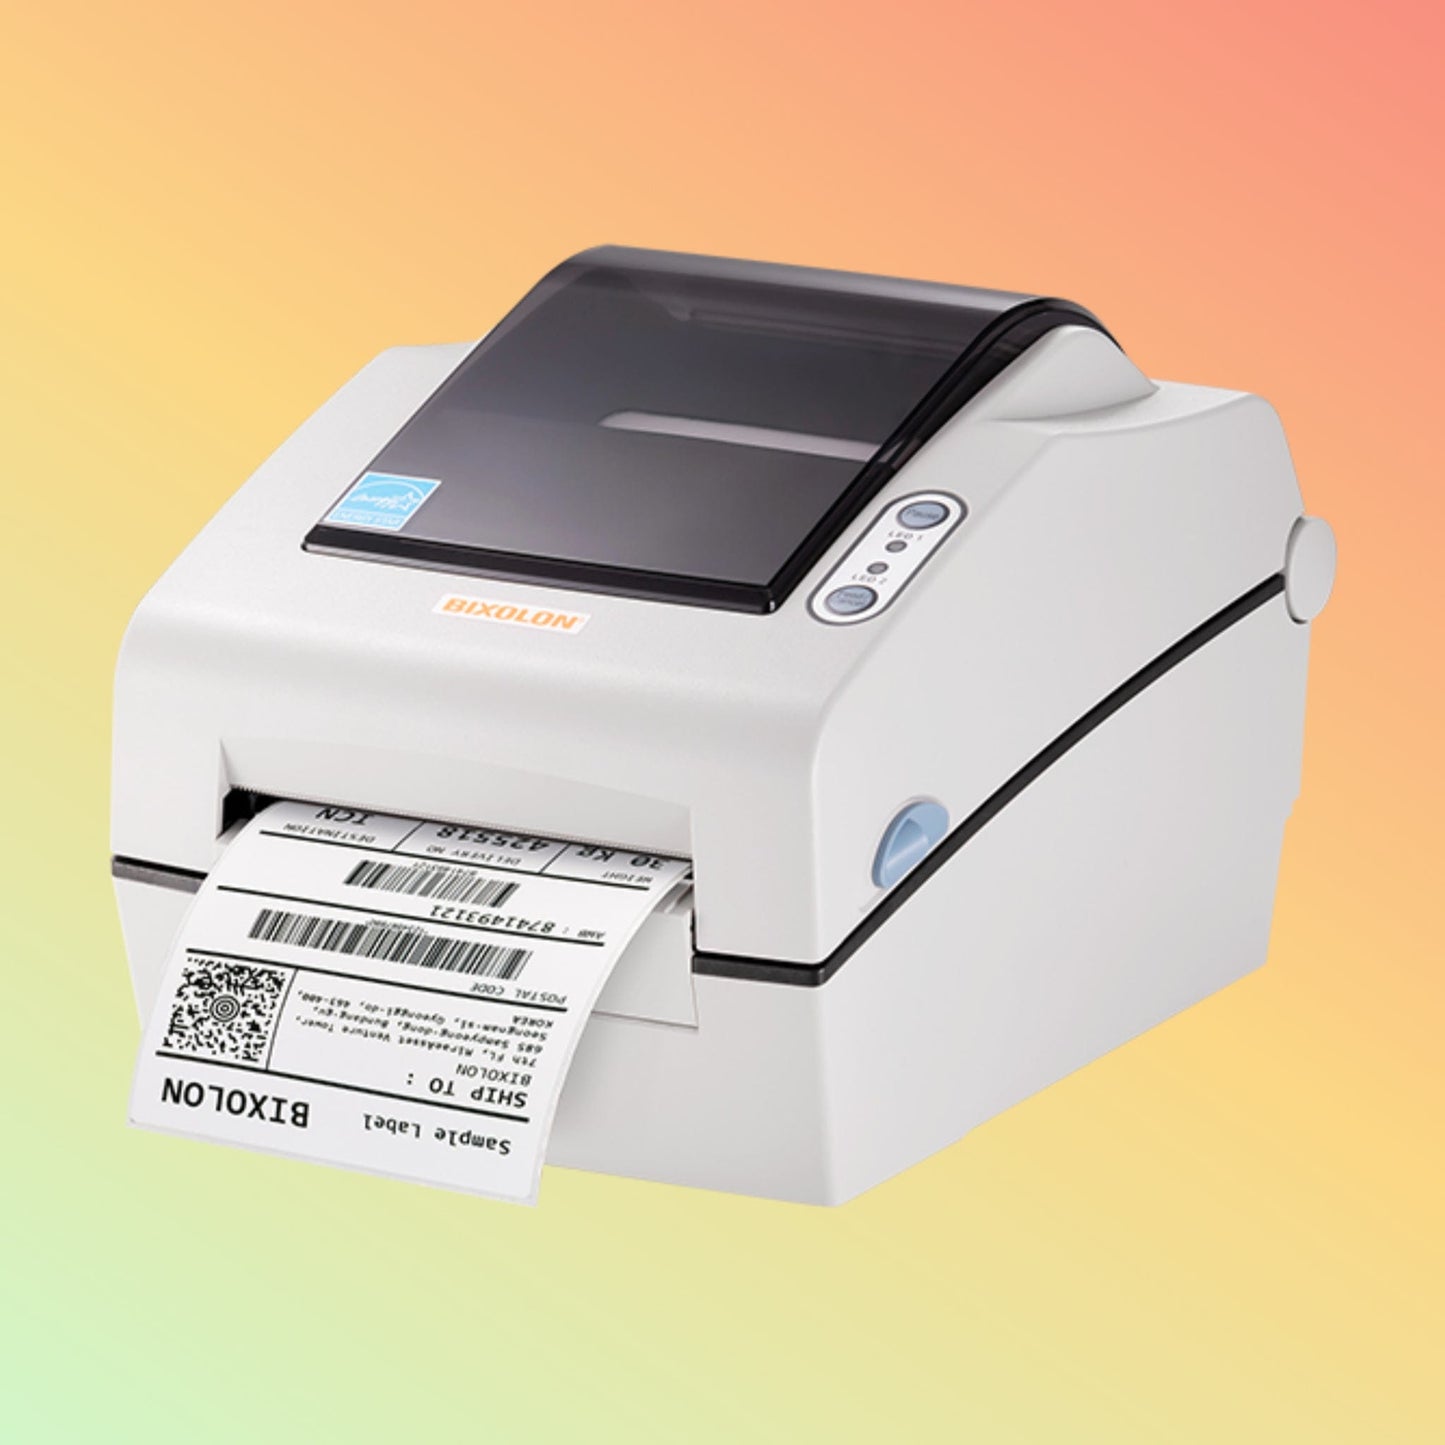 "Versatile Bixolon barcode printer with customizable label design, supports up to 4-inch wide labels for retail efficiency."